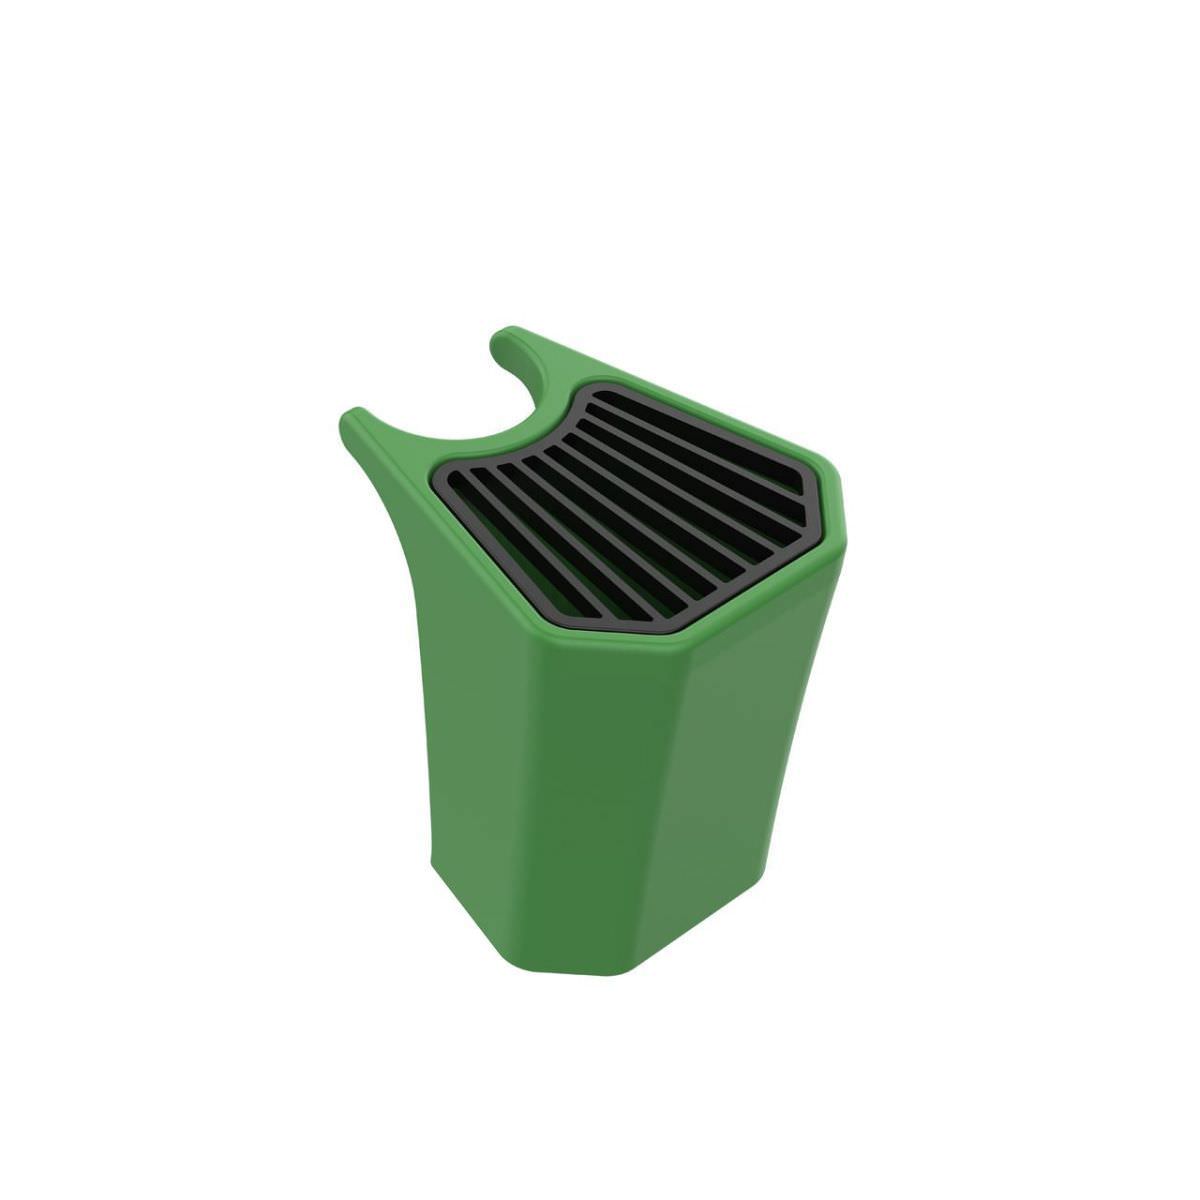 Green bucket for drinking fountain